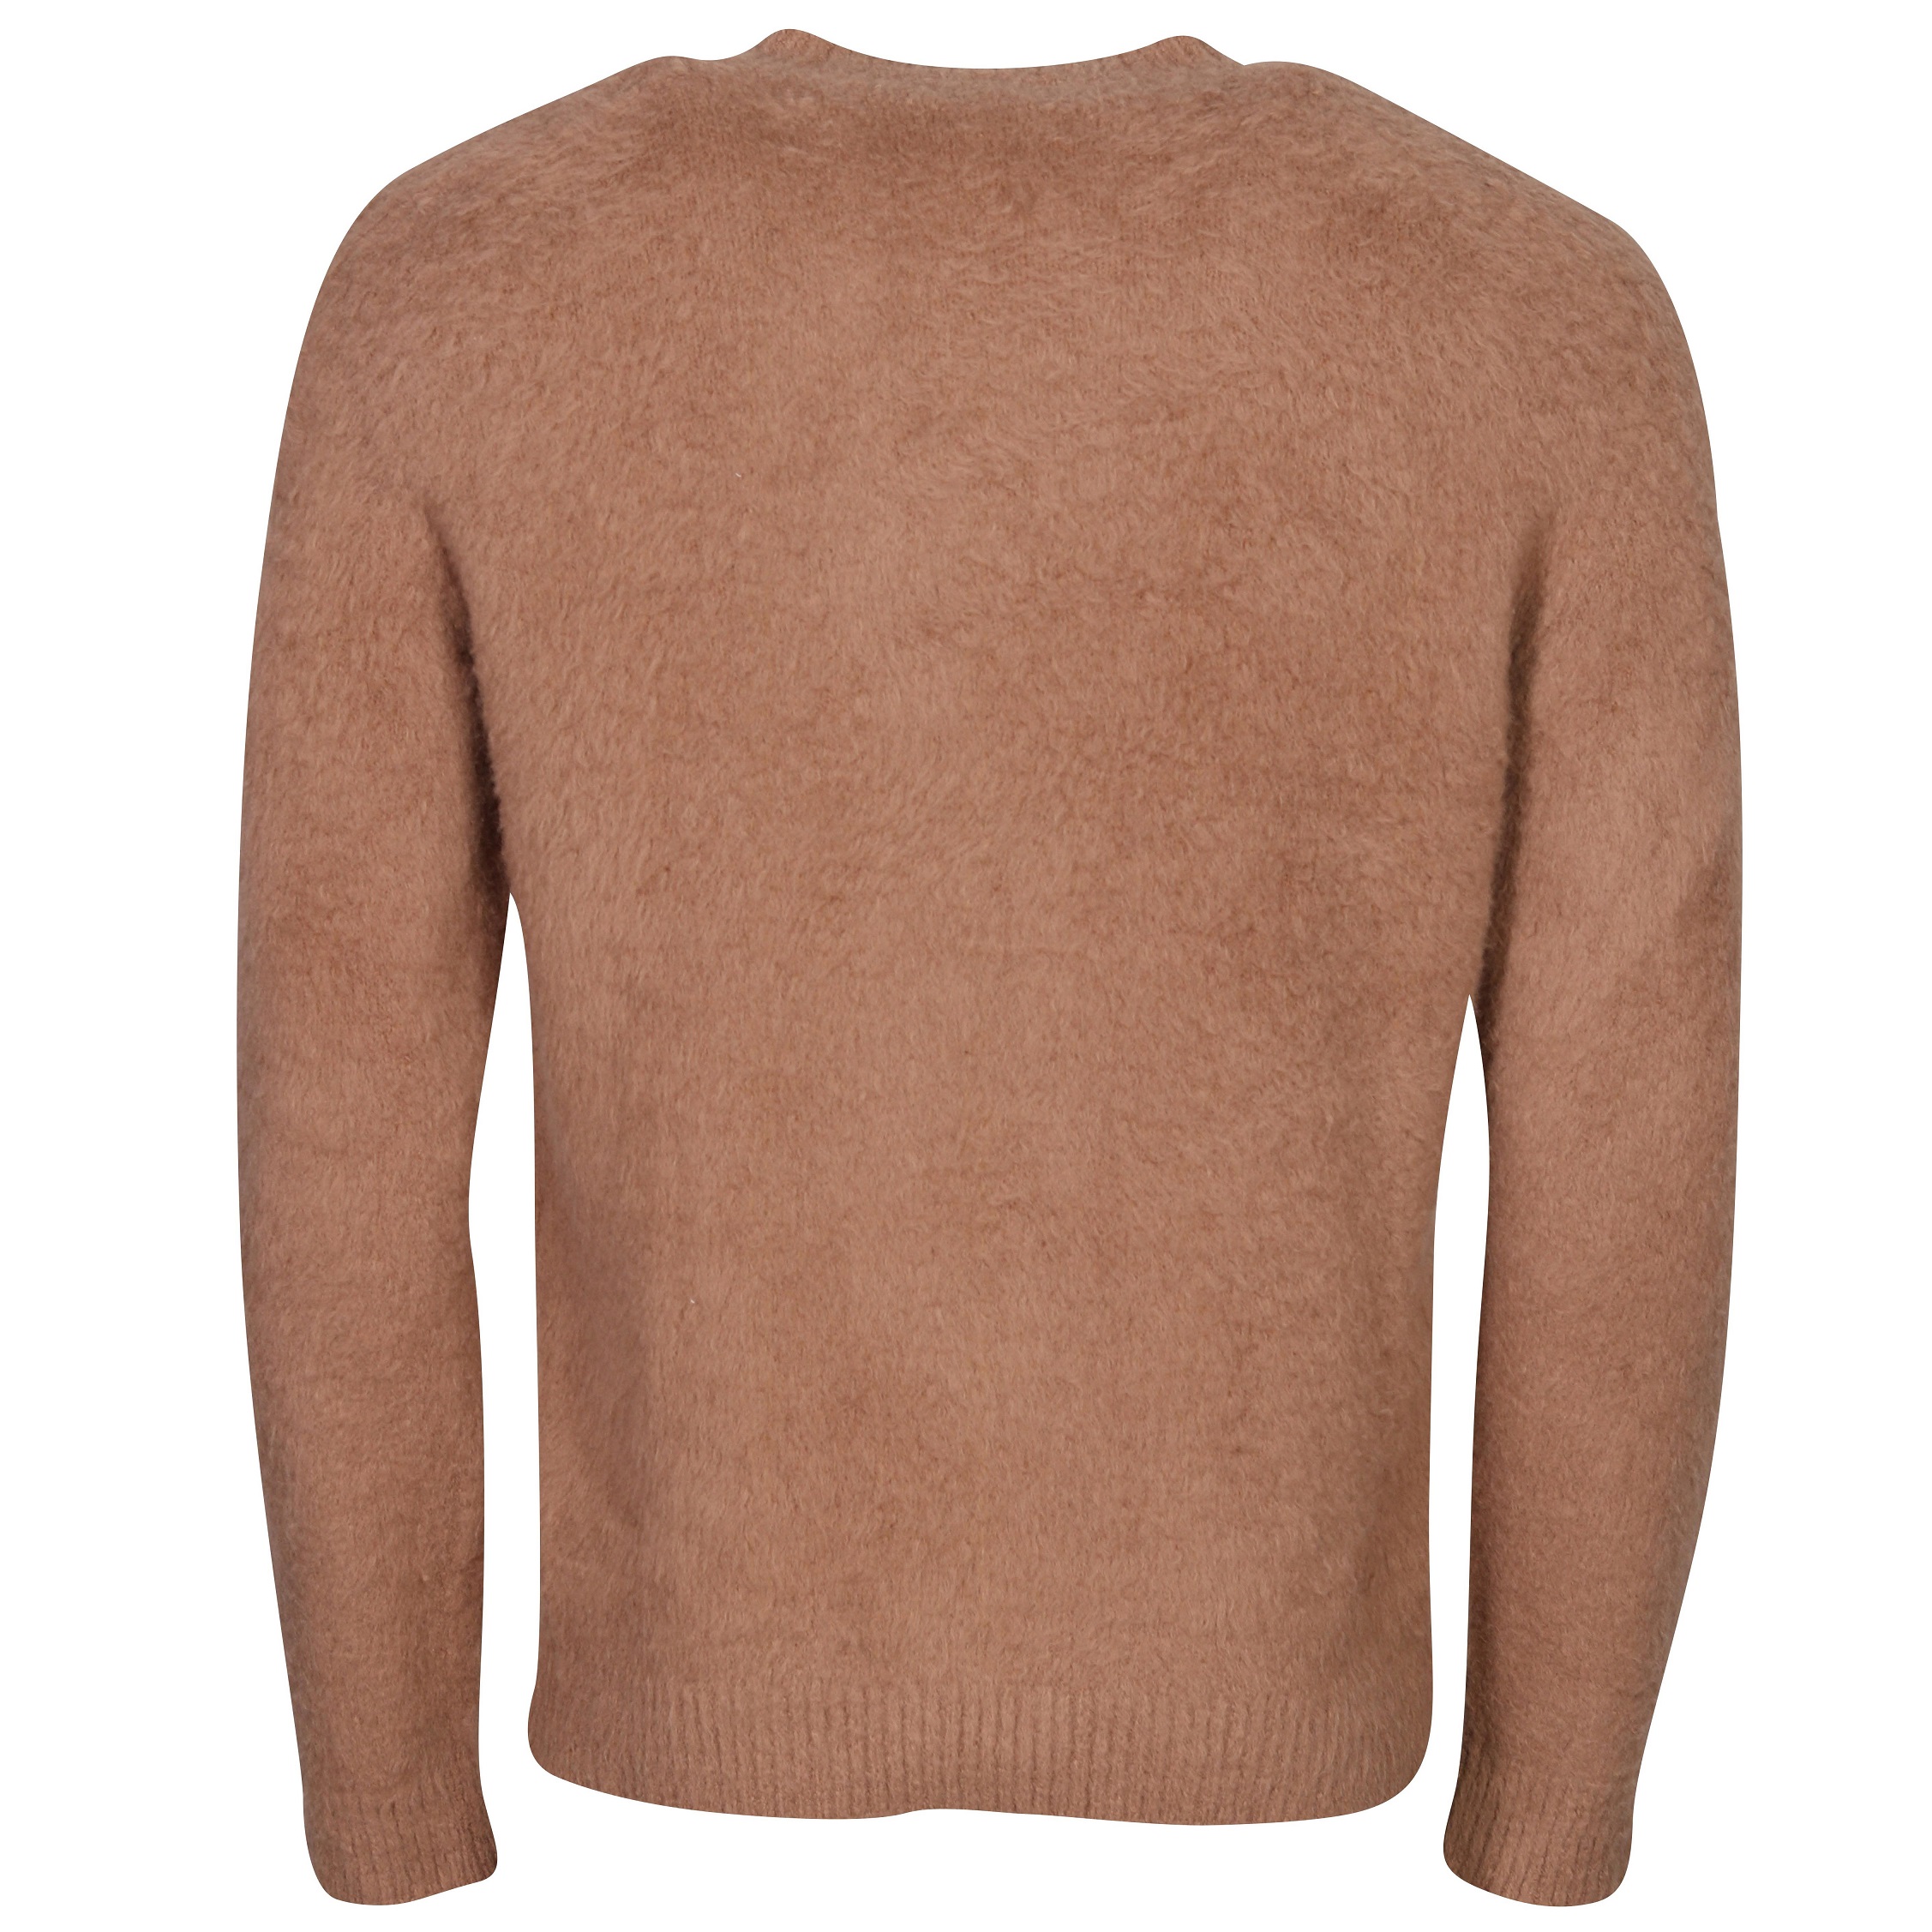 Roberto Collina Cotton Fluffy Knit Pullover in Camel 50